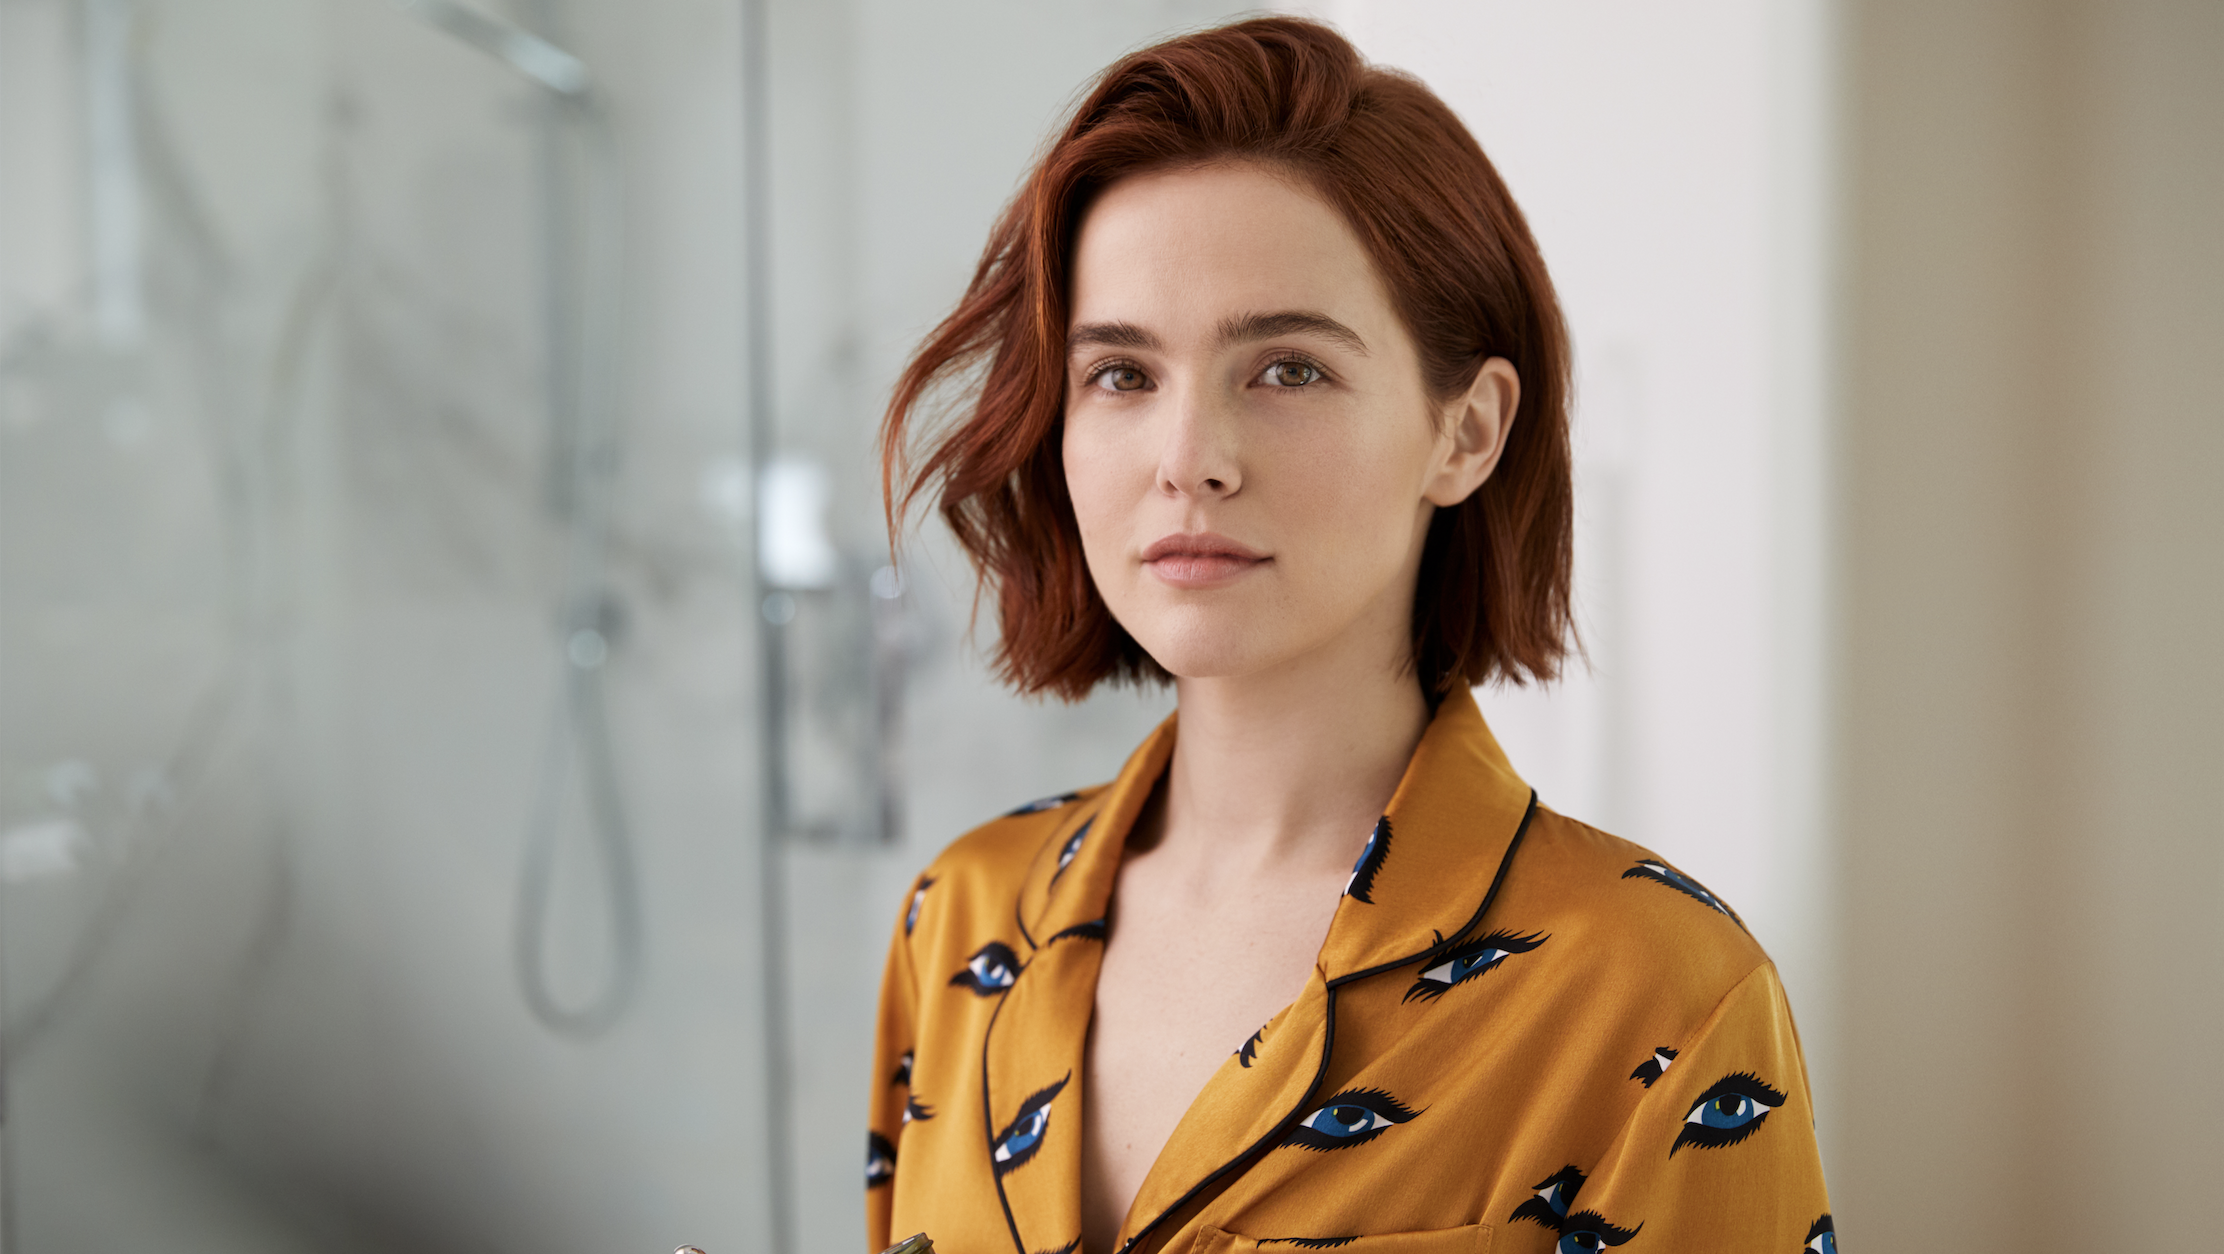 Actress Zoey Deutch's Skincare, Makeup, and Hair Routine